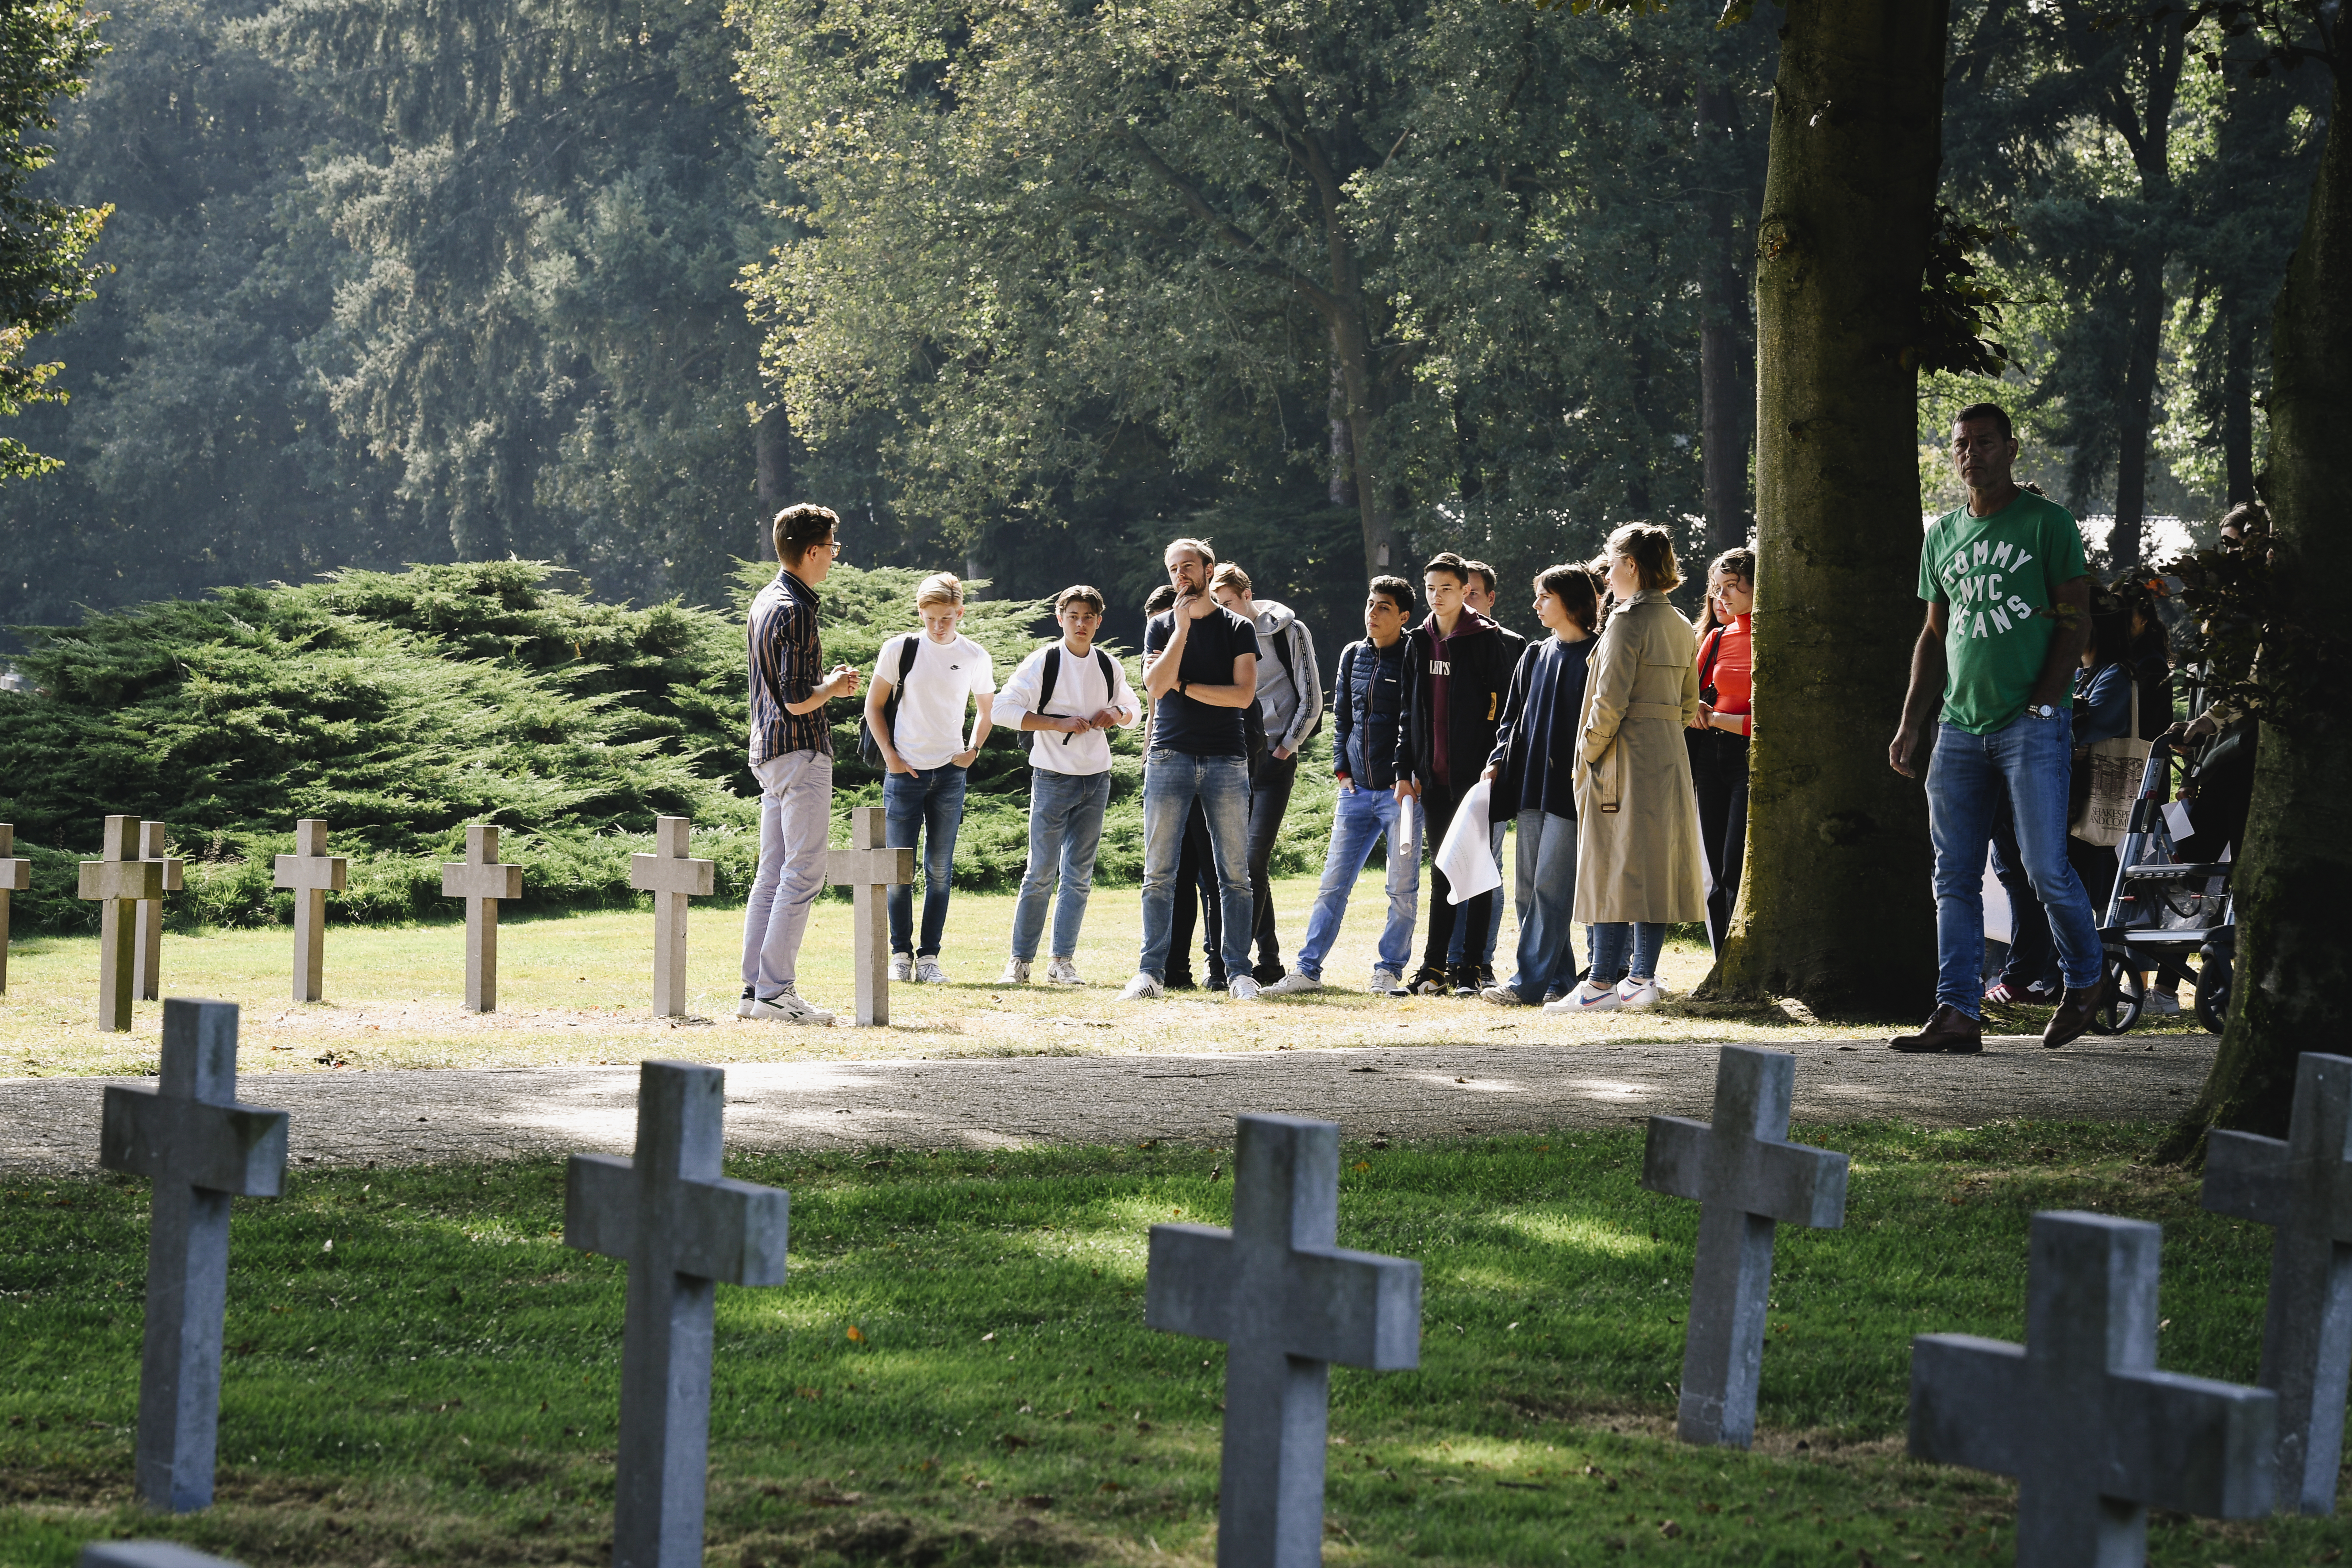 Guided tour at the War Cemetery